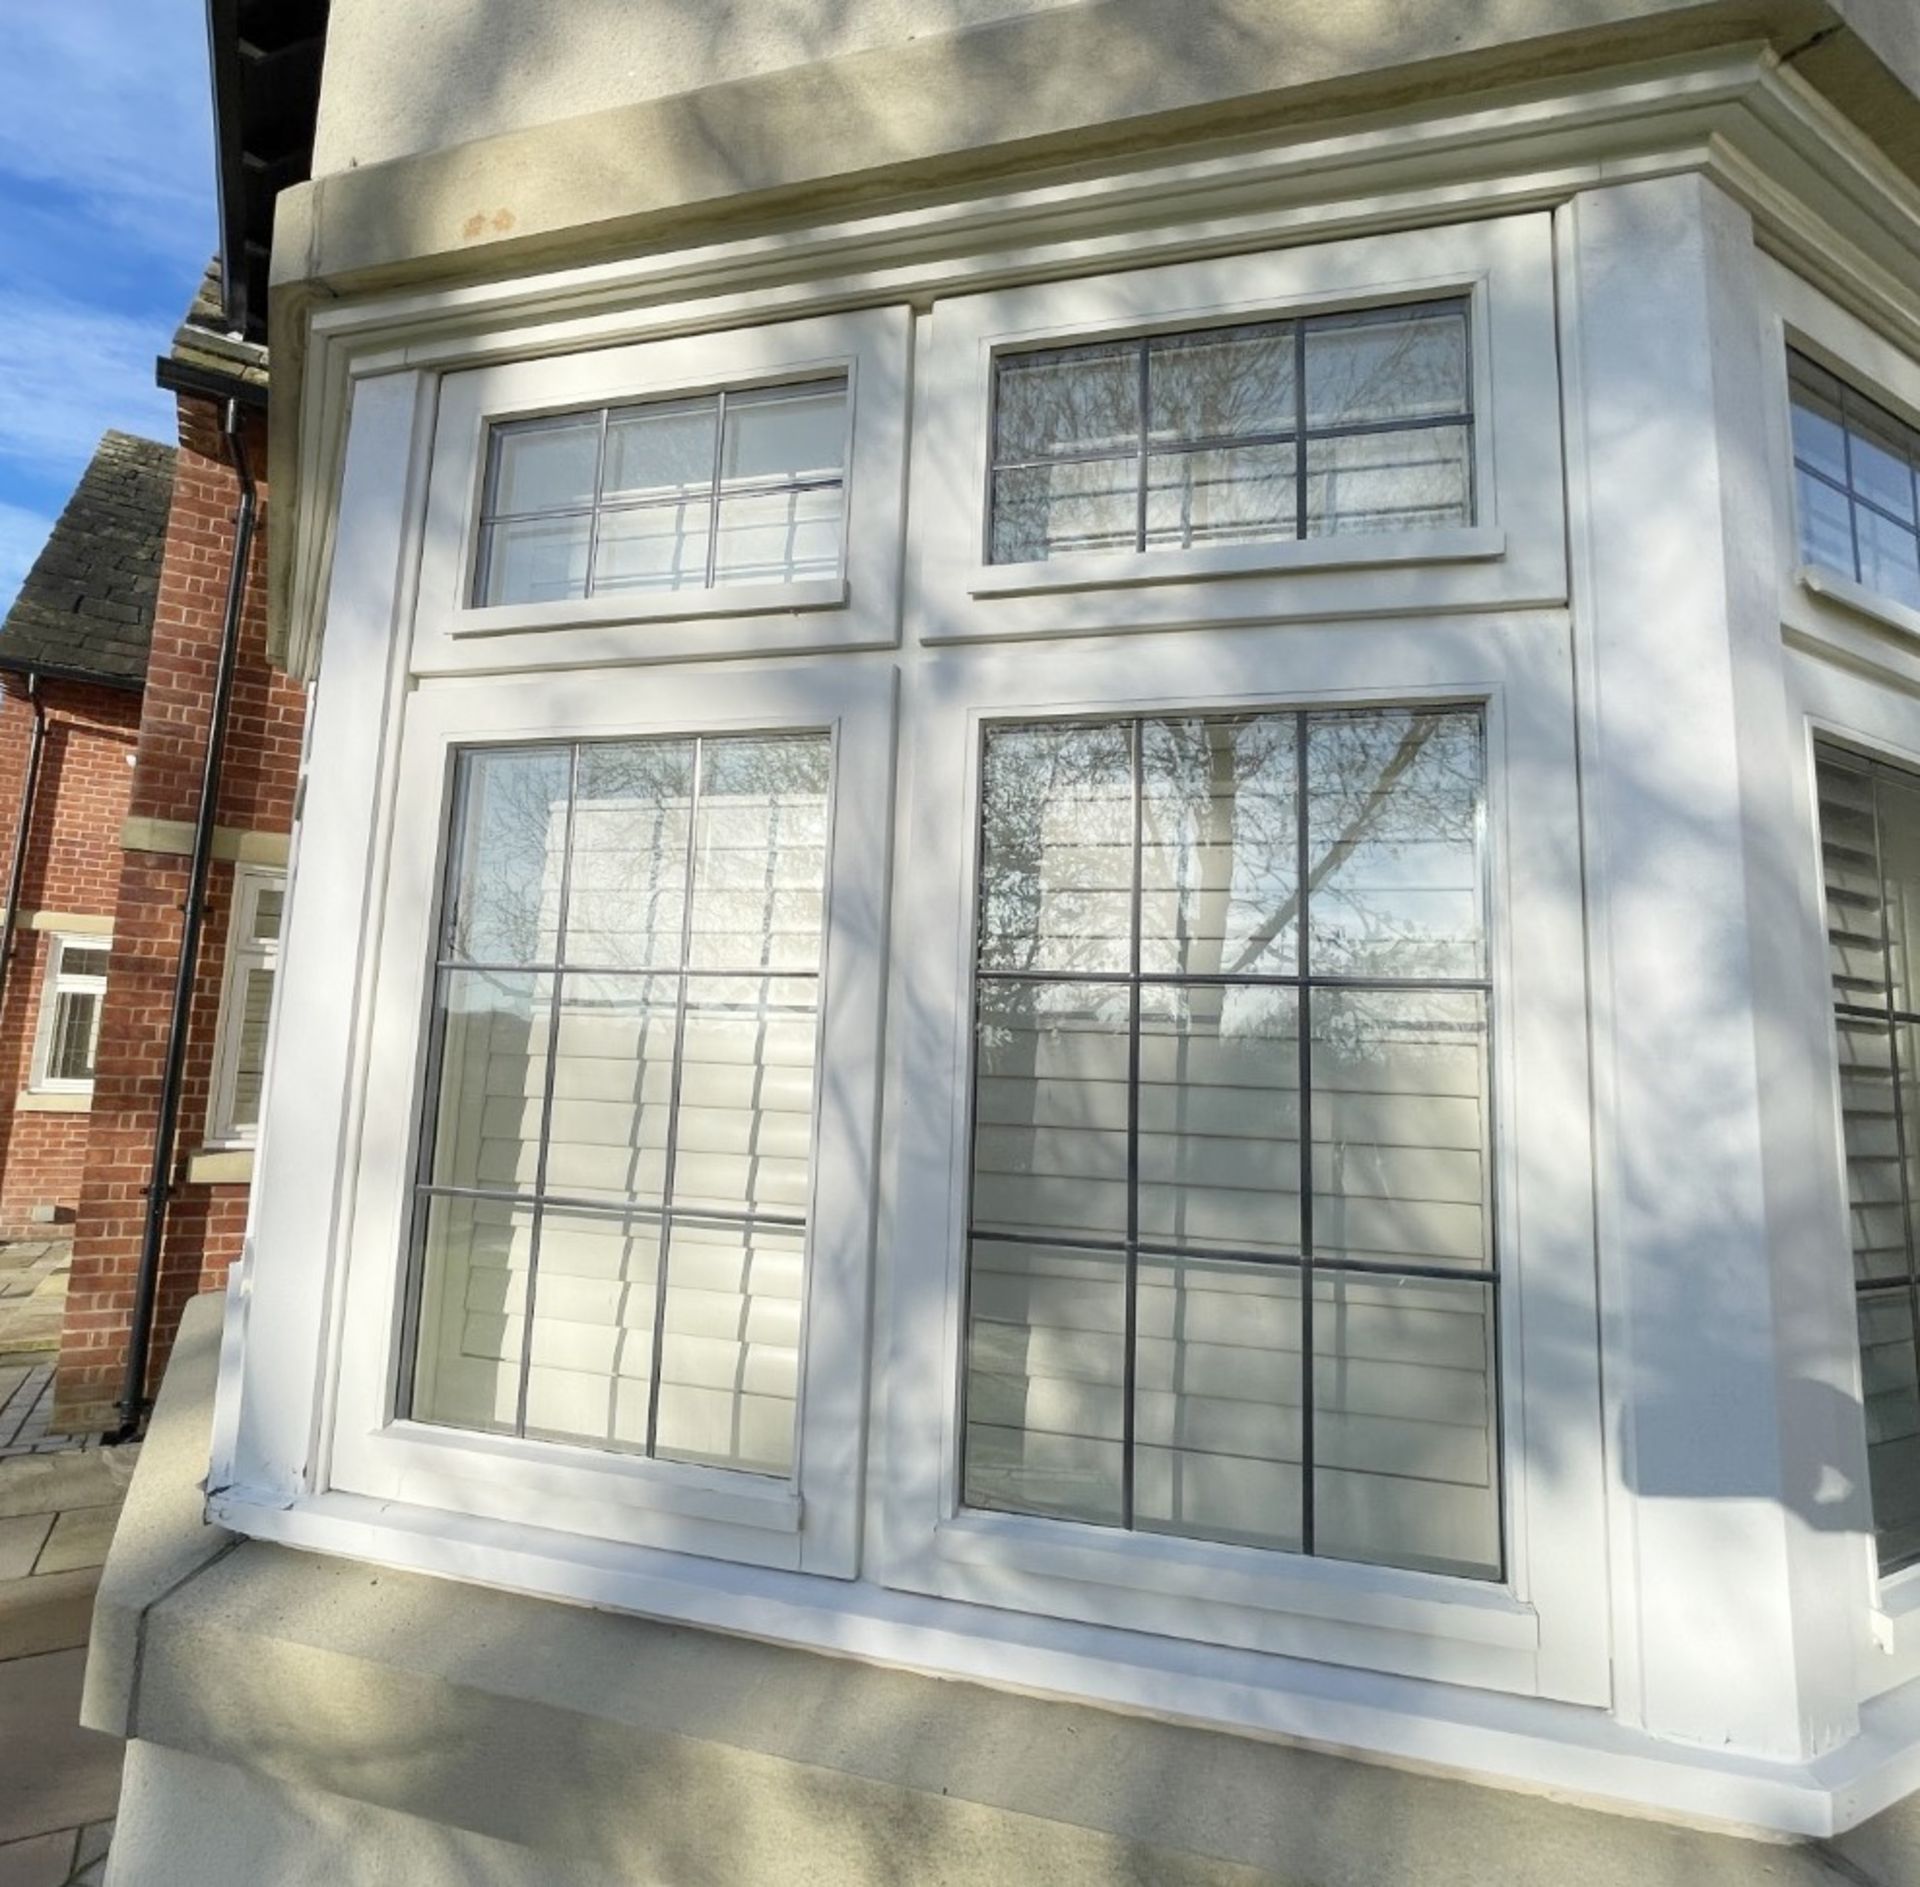 1 x Hardwood Timber Double Glazed Window Frames fitted with Shutter Blinds, In White - Ref: PAN101